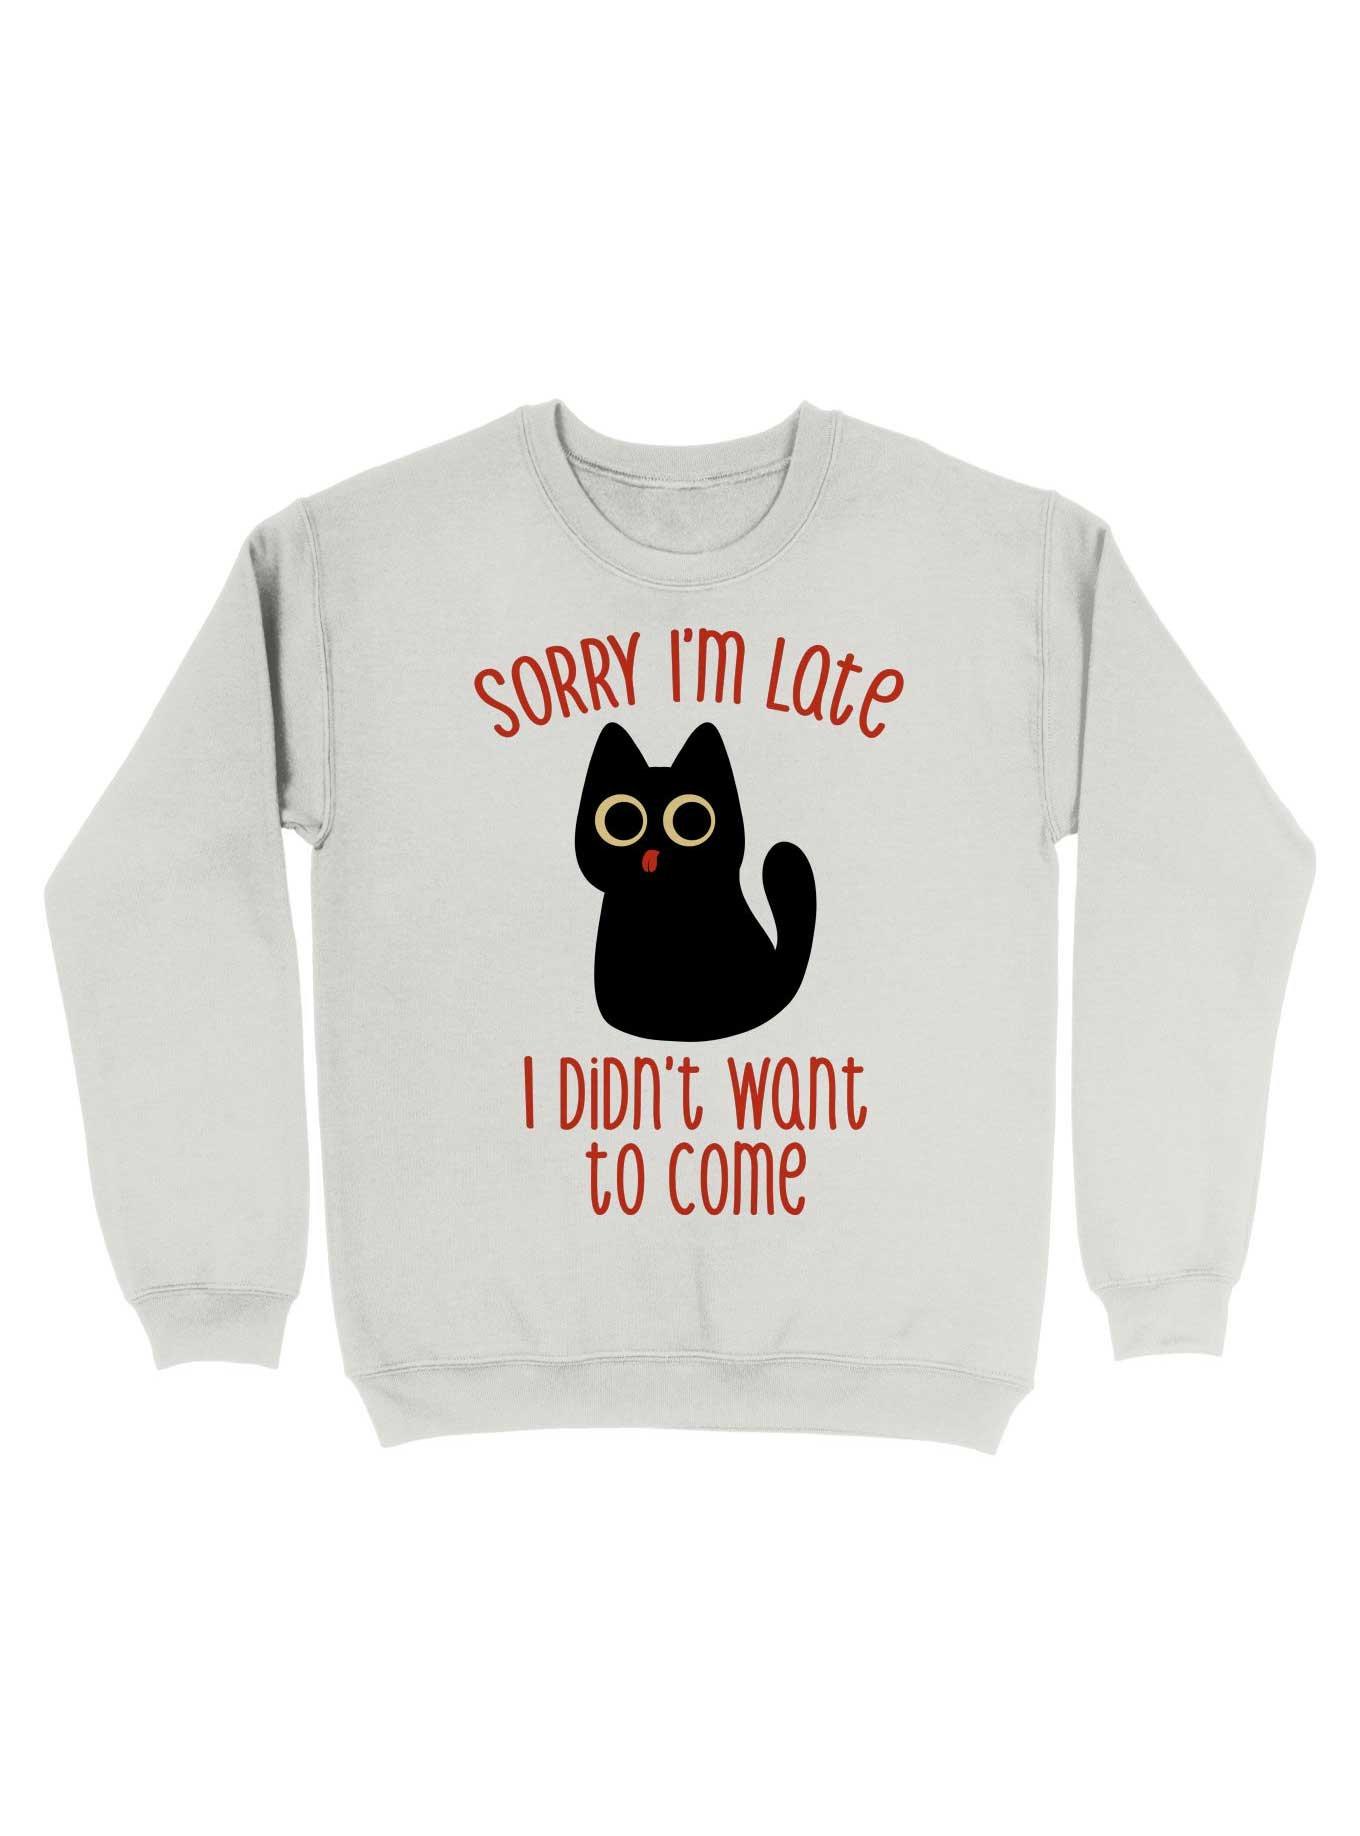 Sorry I'm Late I Didn't Want to Come Black Cat Sweatshirt, WHITE, hi-res